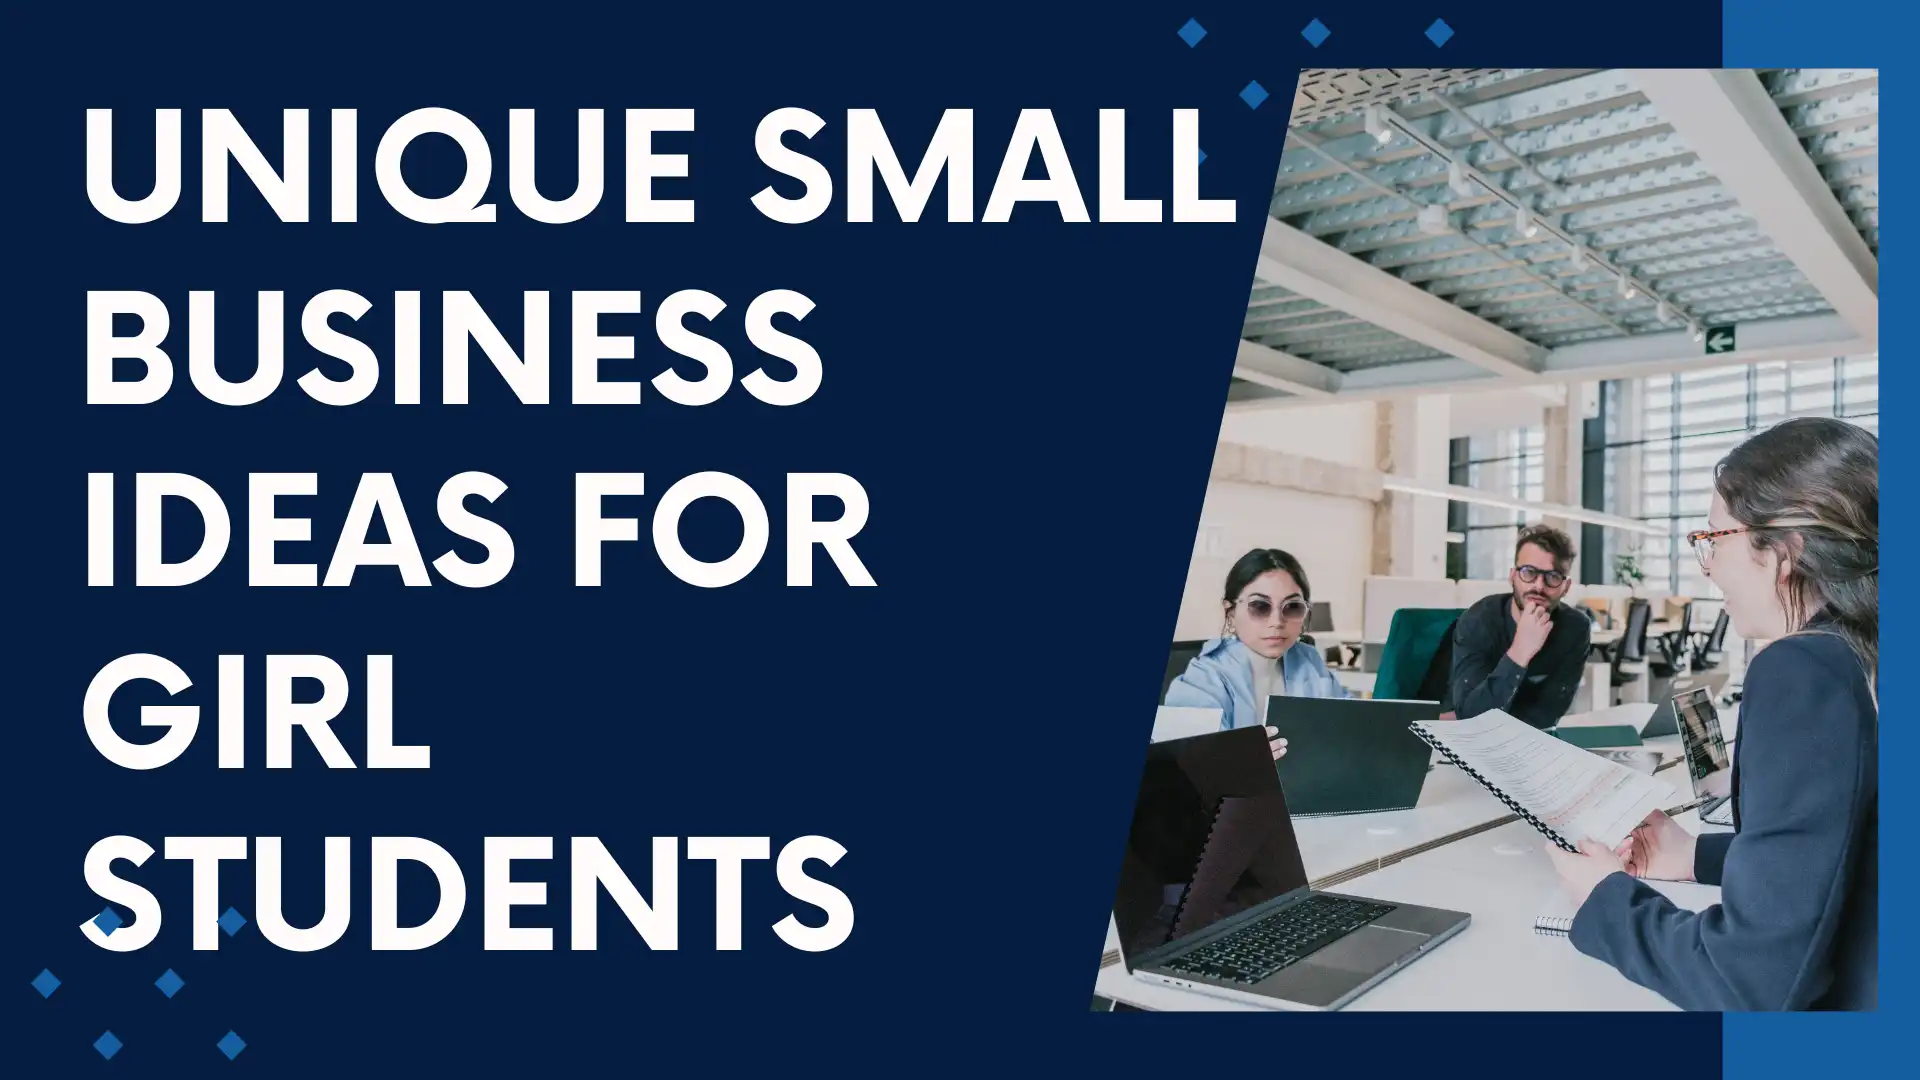 Unique small business ideas for girl students